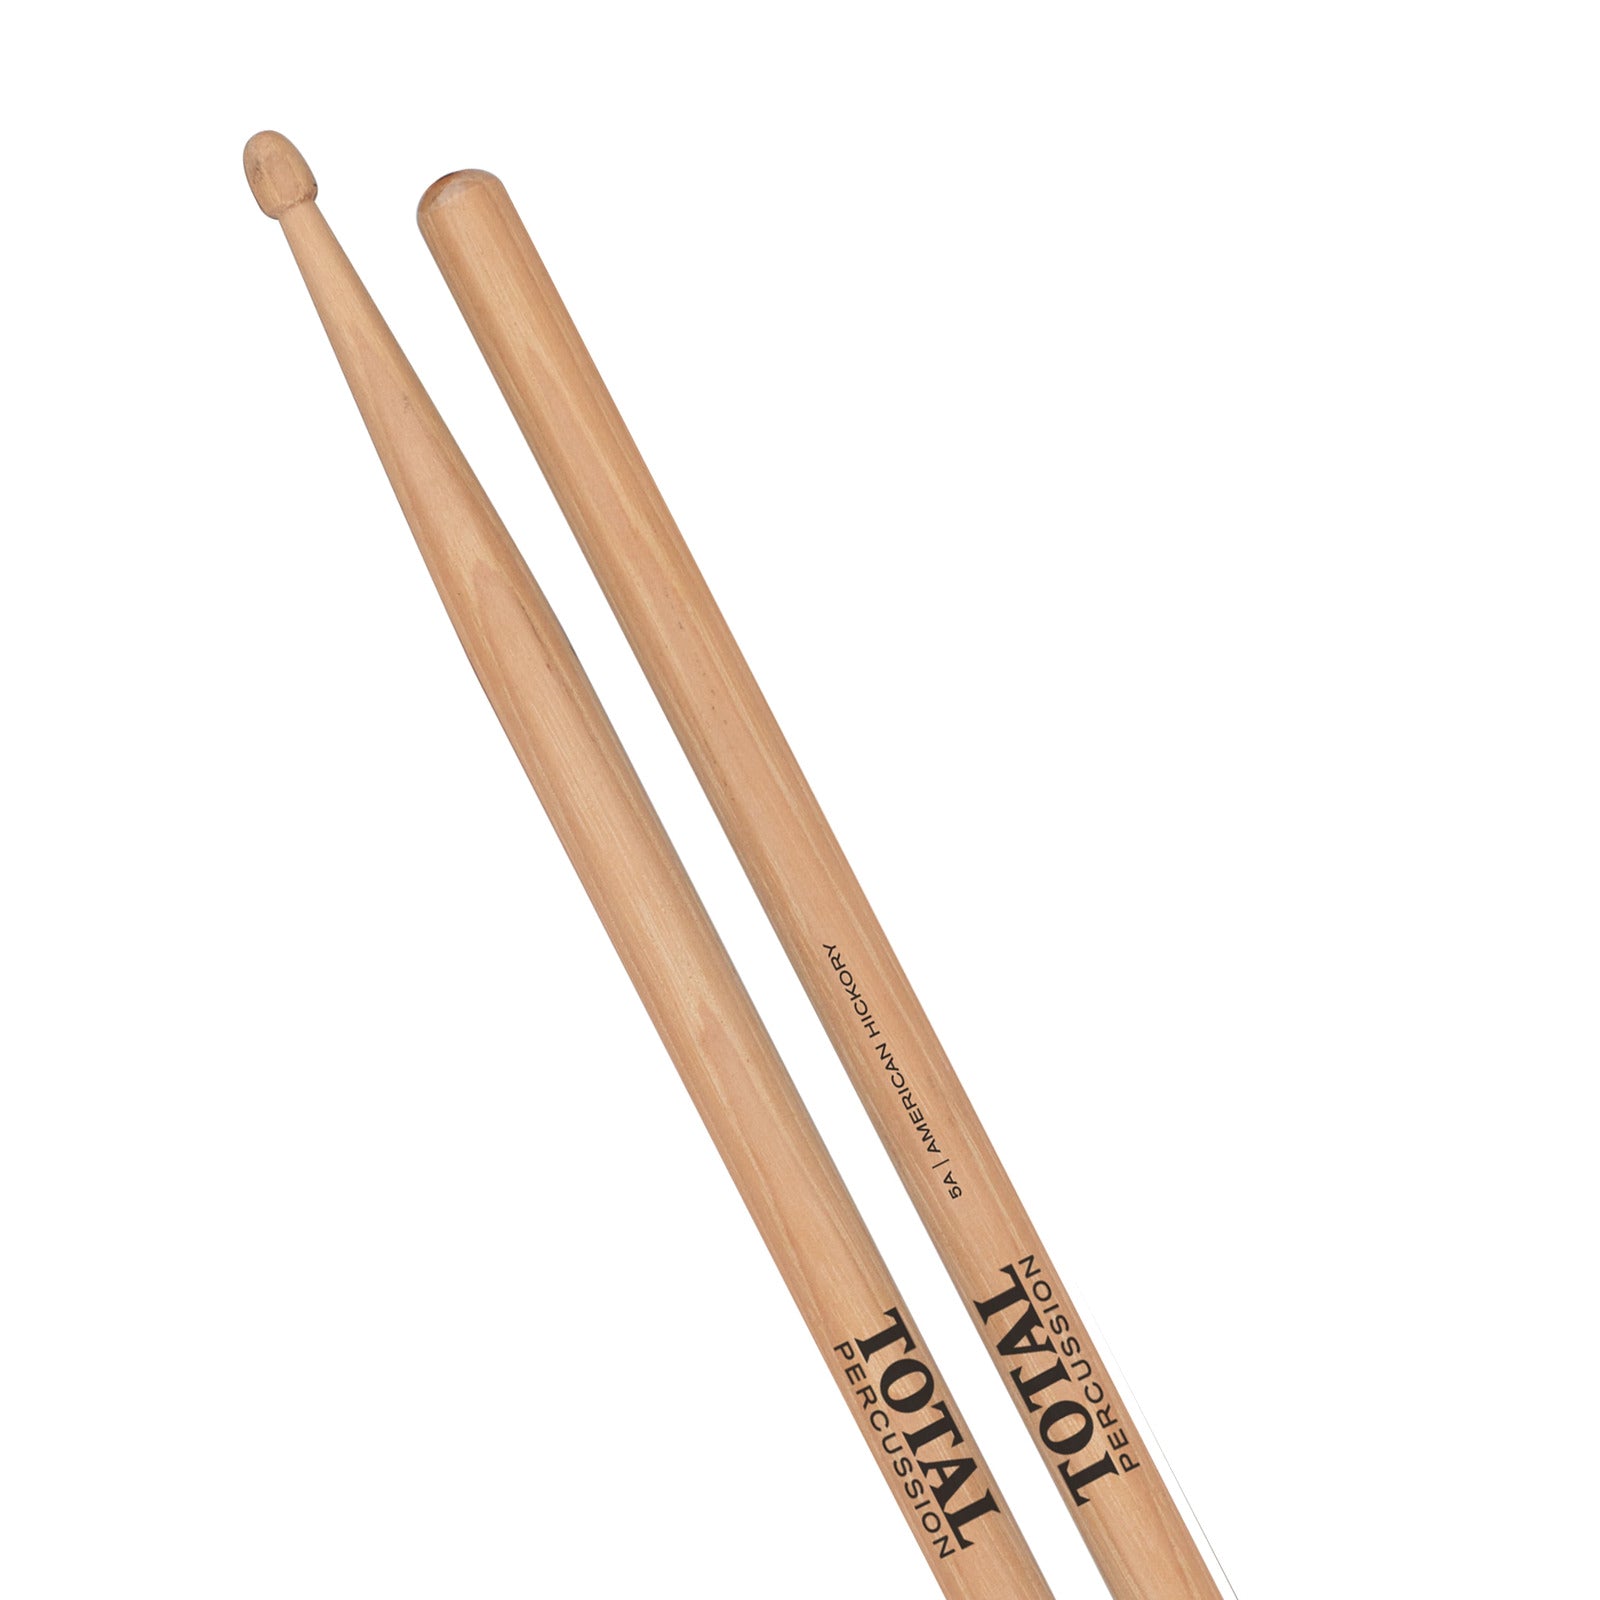 Total Percussion 5A Wood Tip Drumsticks